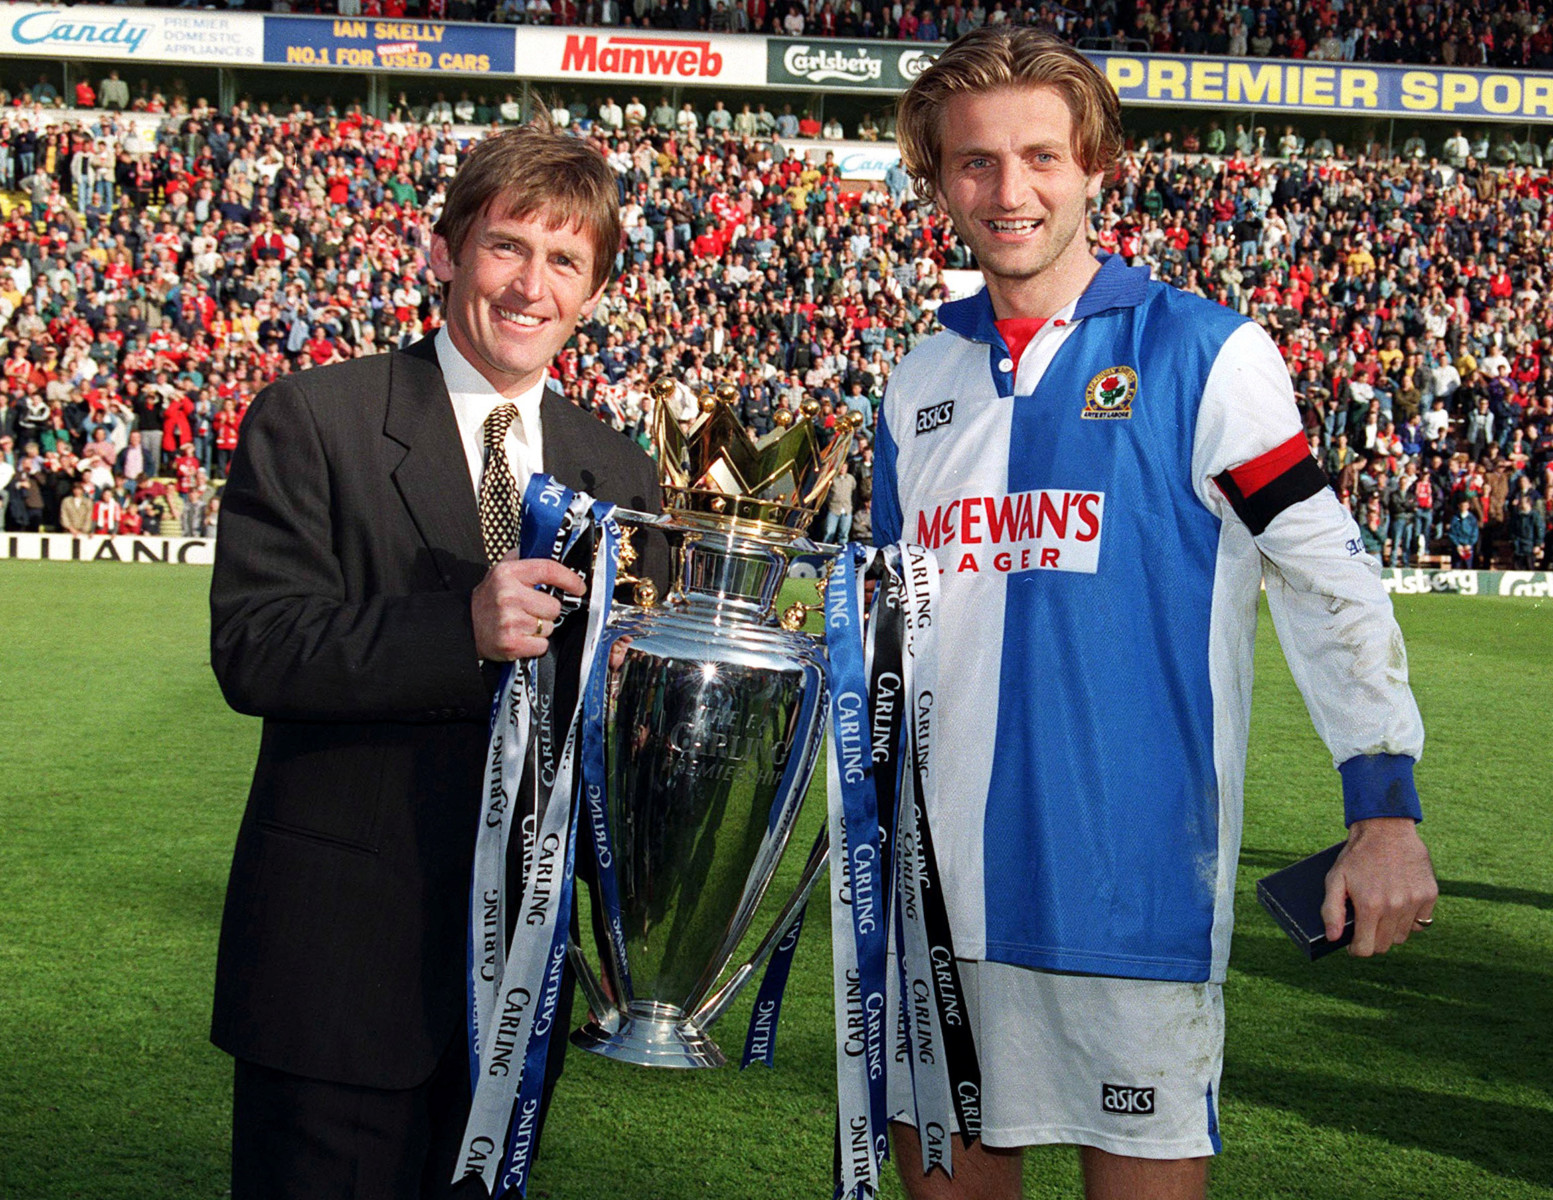 He was manager of Blackburn when they won the Premier League in 1995